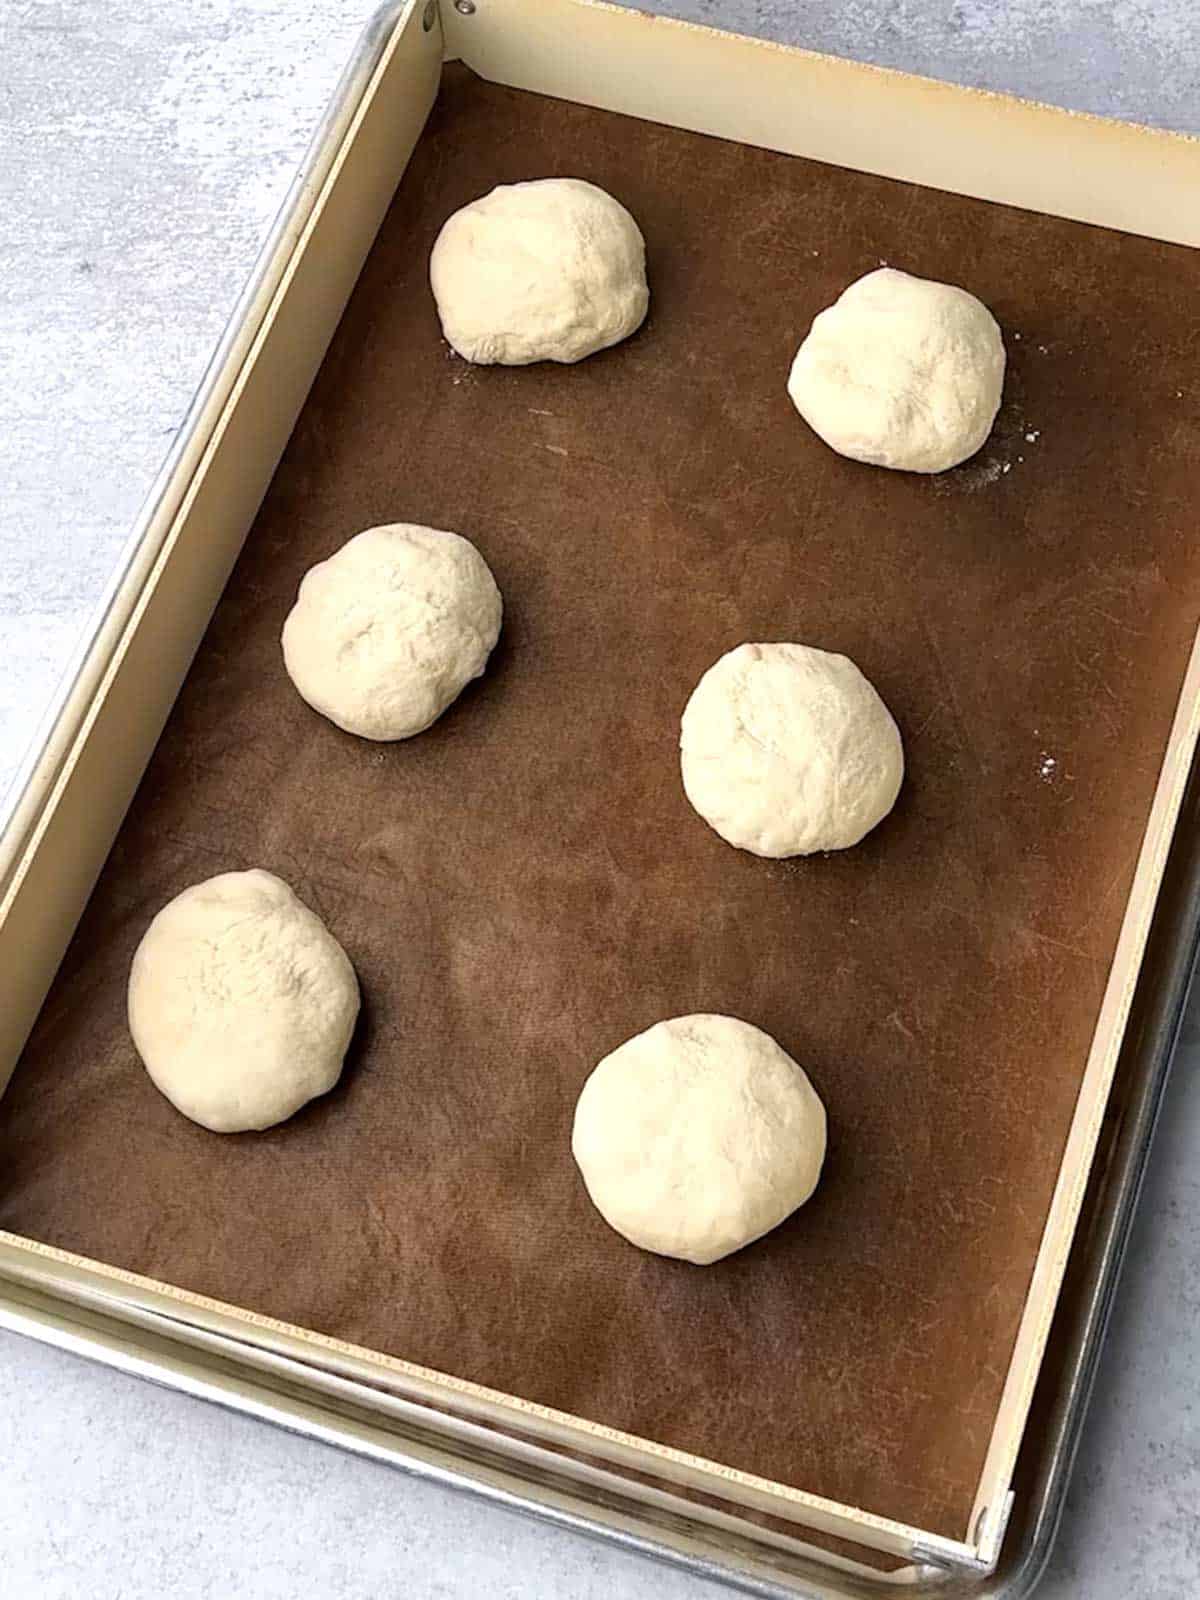 Rolls ready to rise.